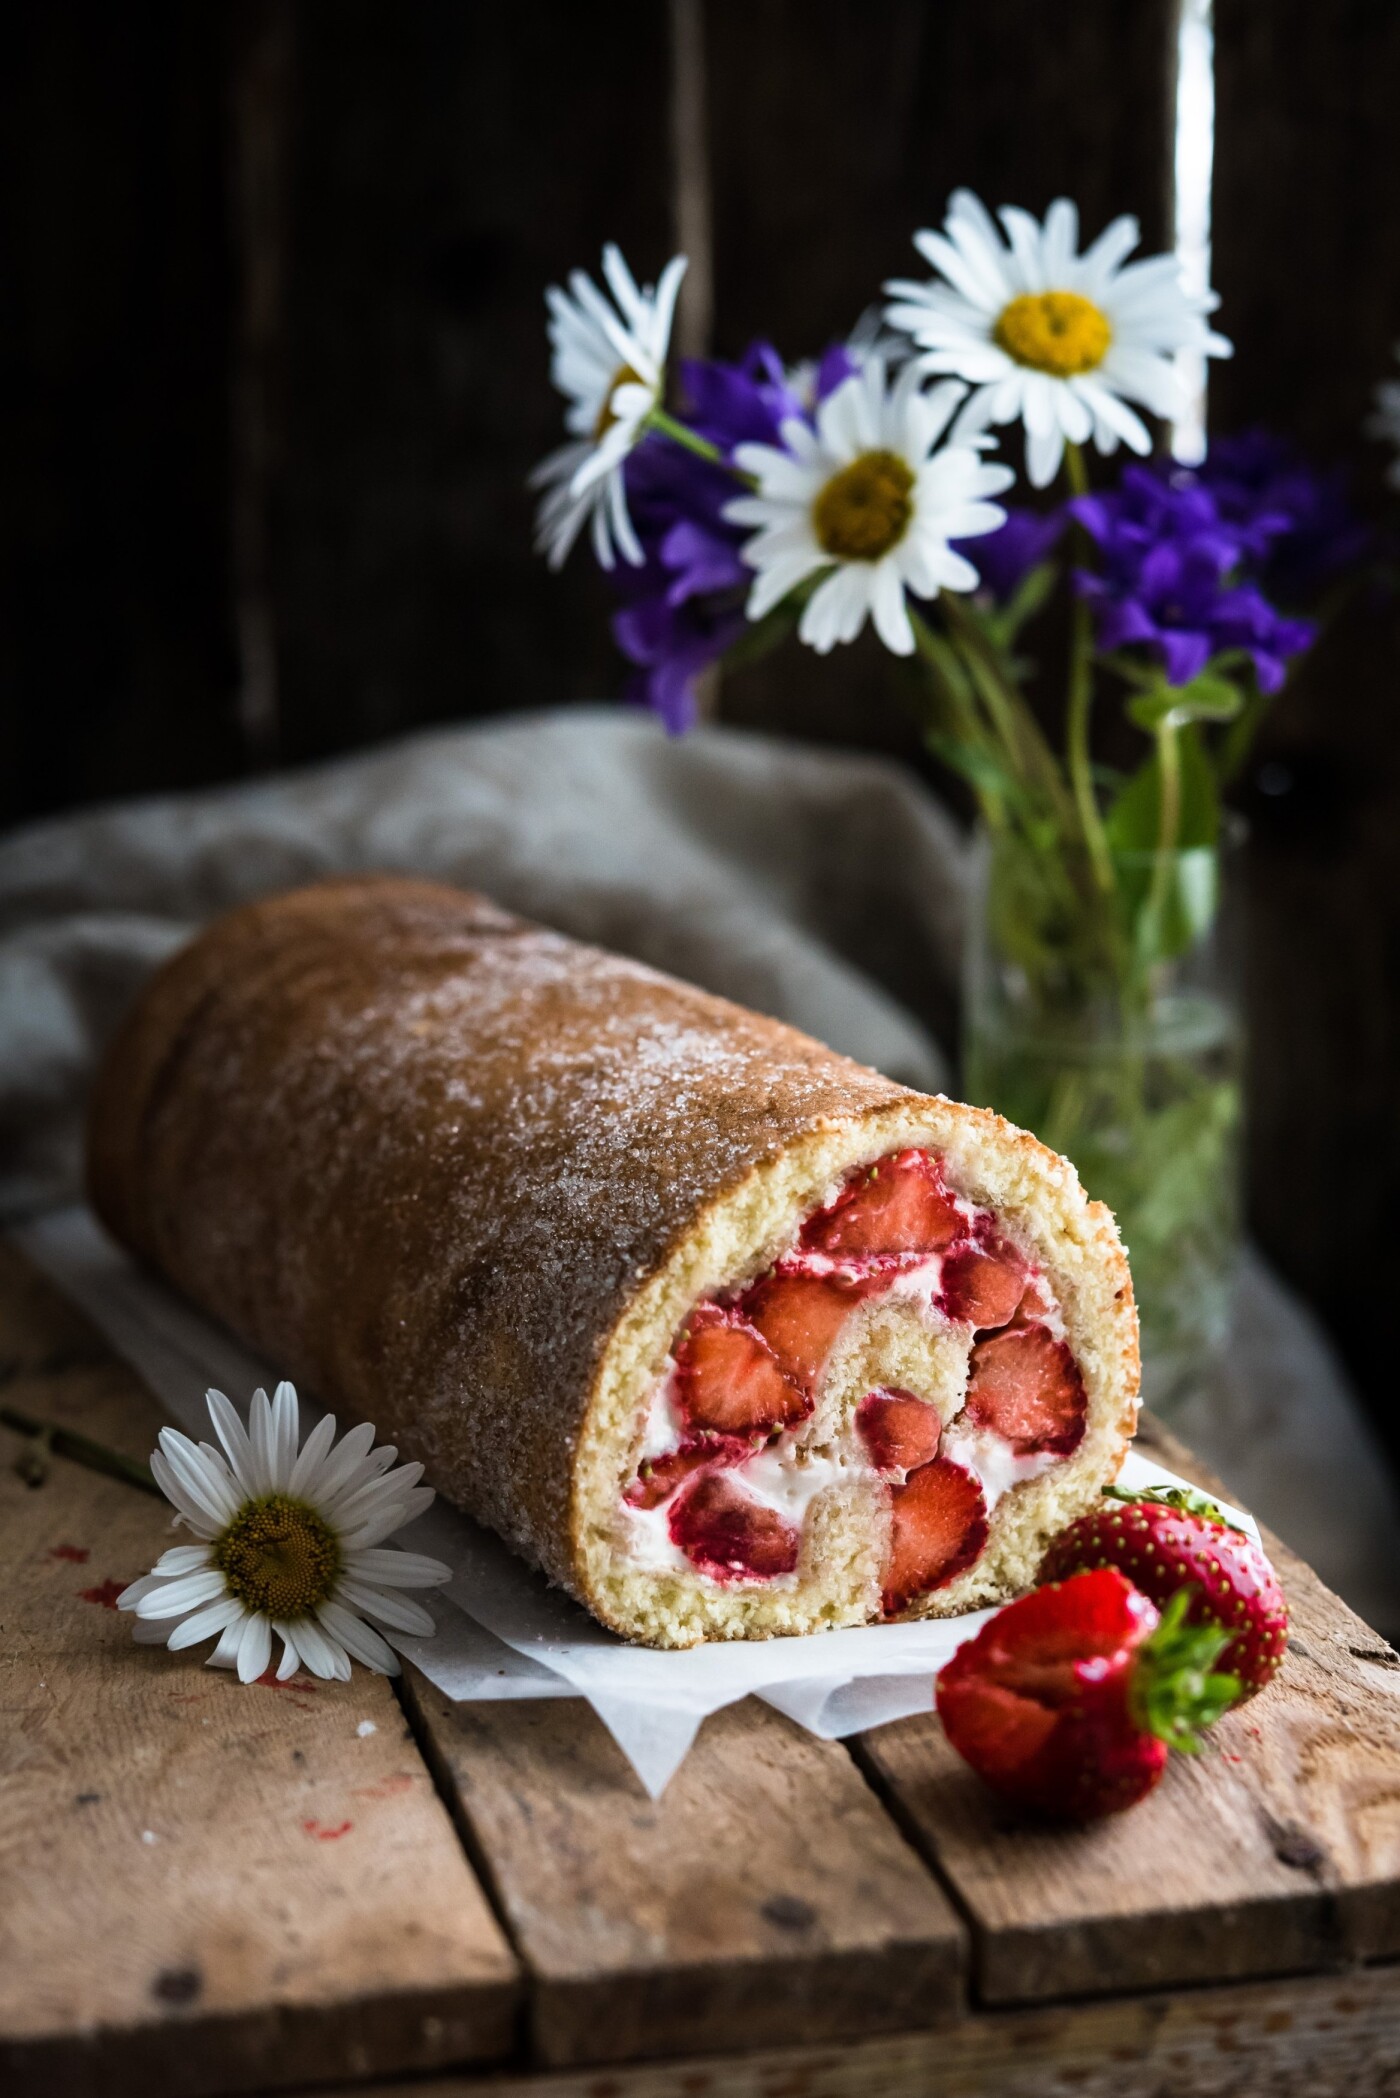 A typical jelly roll, filled with fresh strawberries and whipped cream. That’s the taste of summer at its best. It’s also gluten free.